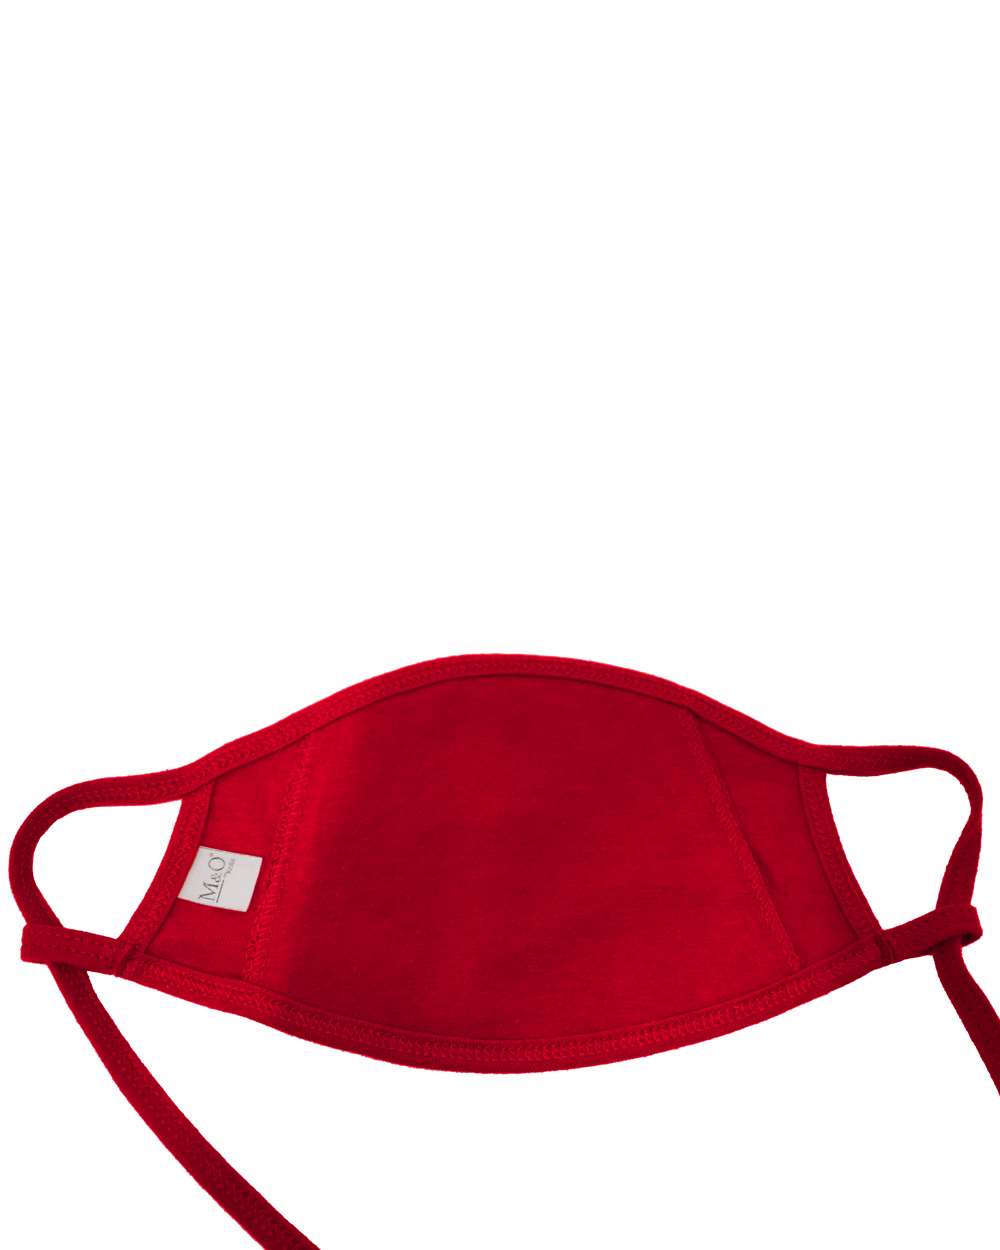 10 X 100% Cotton Antimicrobial Triple Layer Adjustable Mask - Red